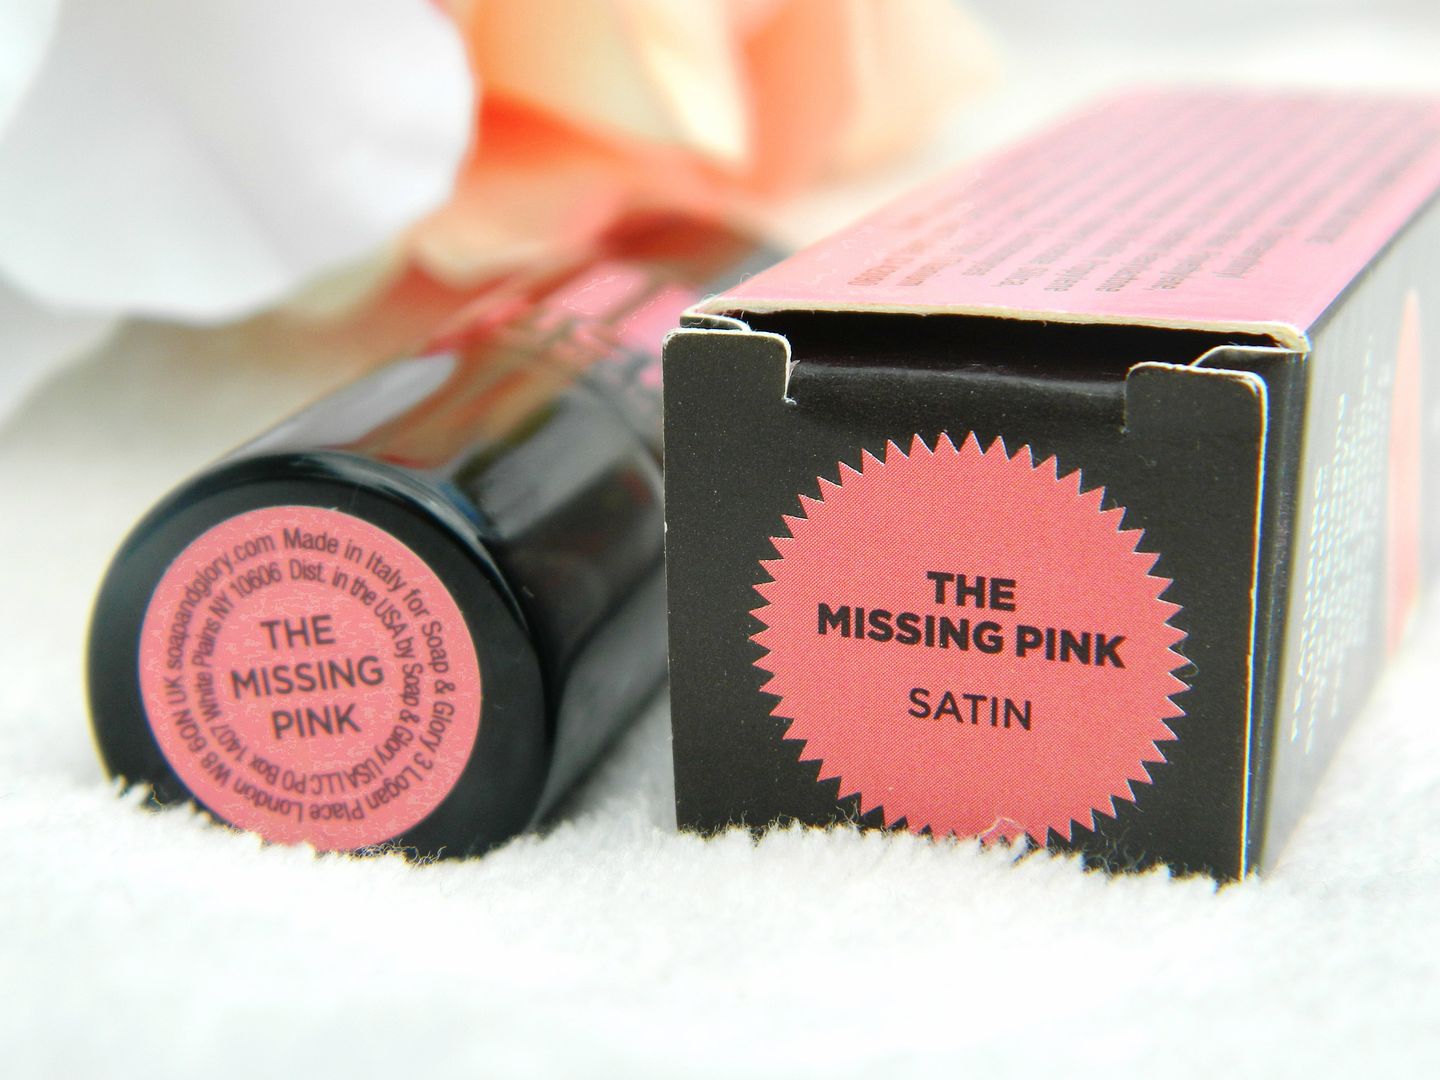 Soap And Glory Super Colour Fabu Lipstick In The Missing Pink Satin Finish Review Packaging Name Label Belle Amie UK Beauty Fashion Lifestyle Blog